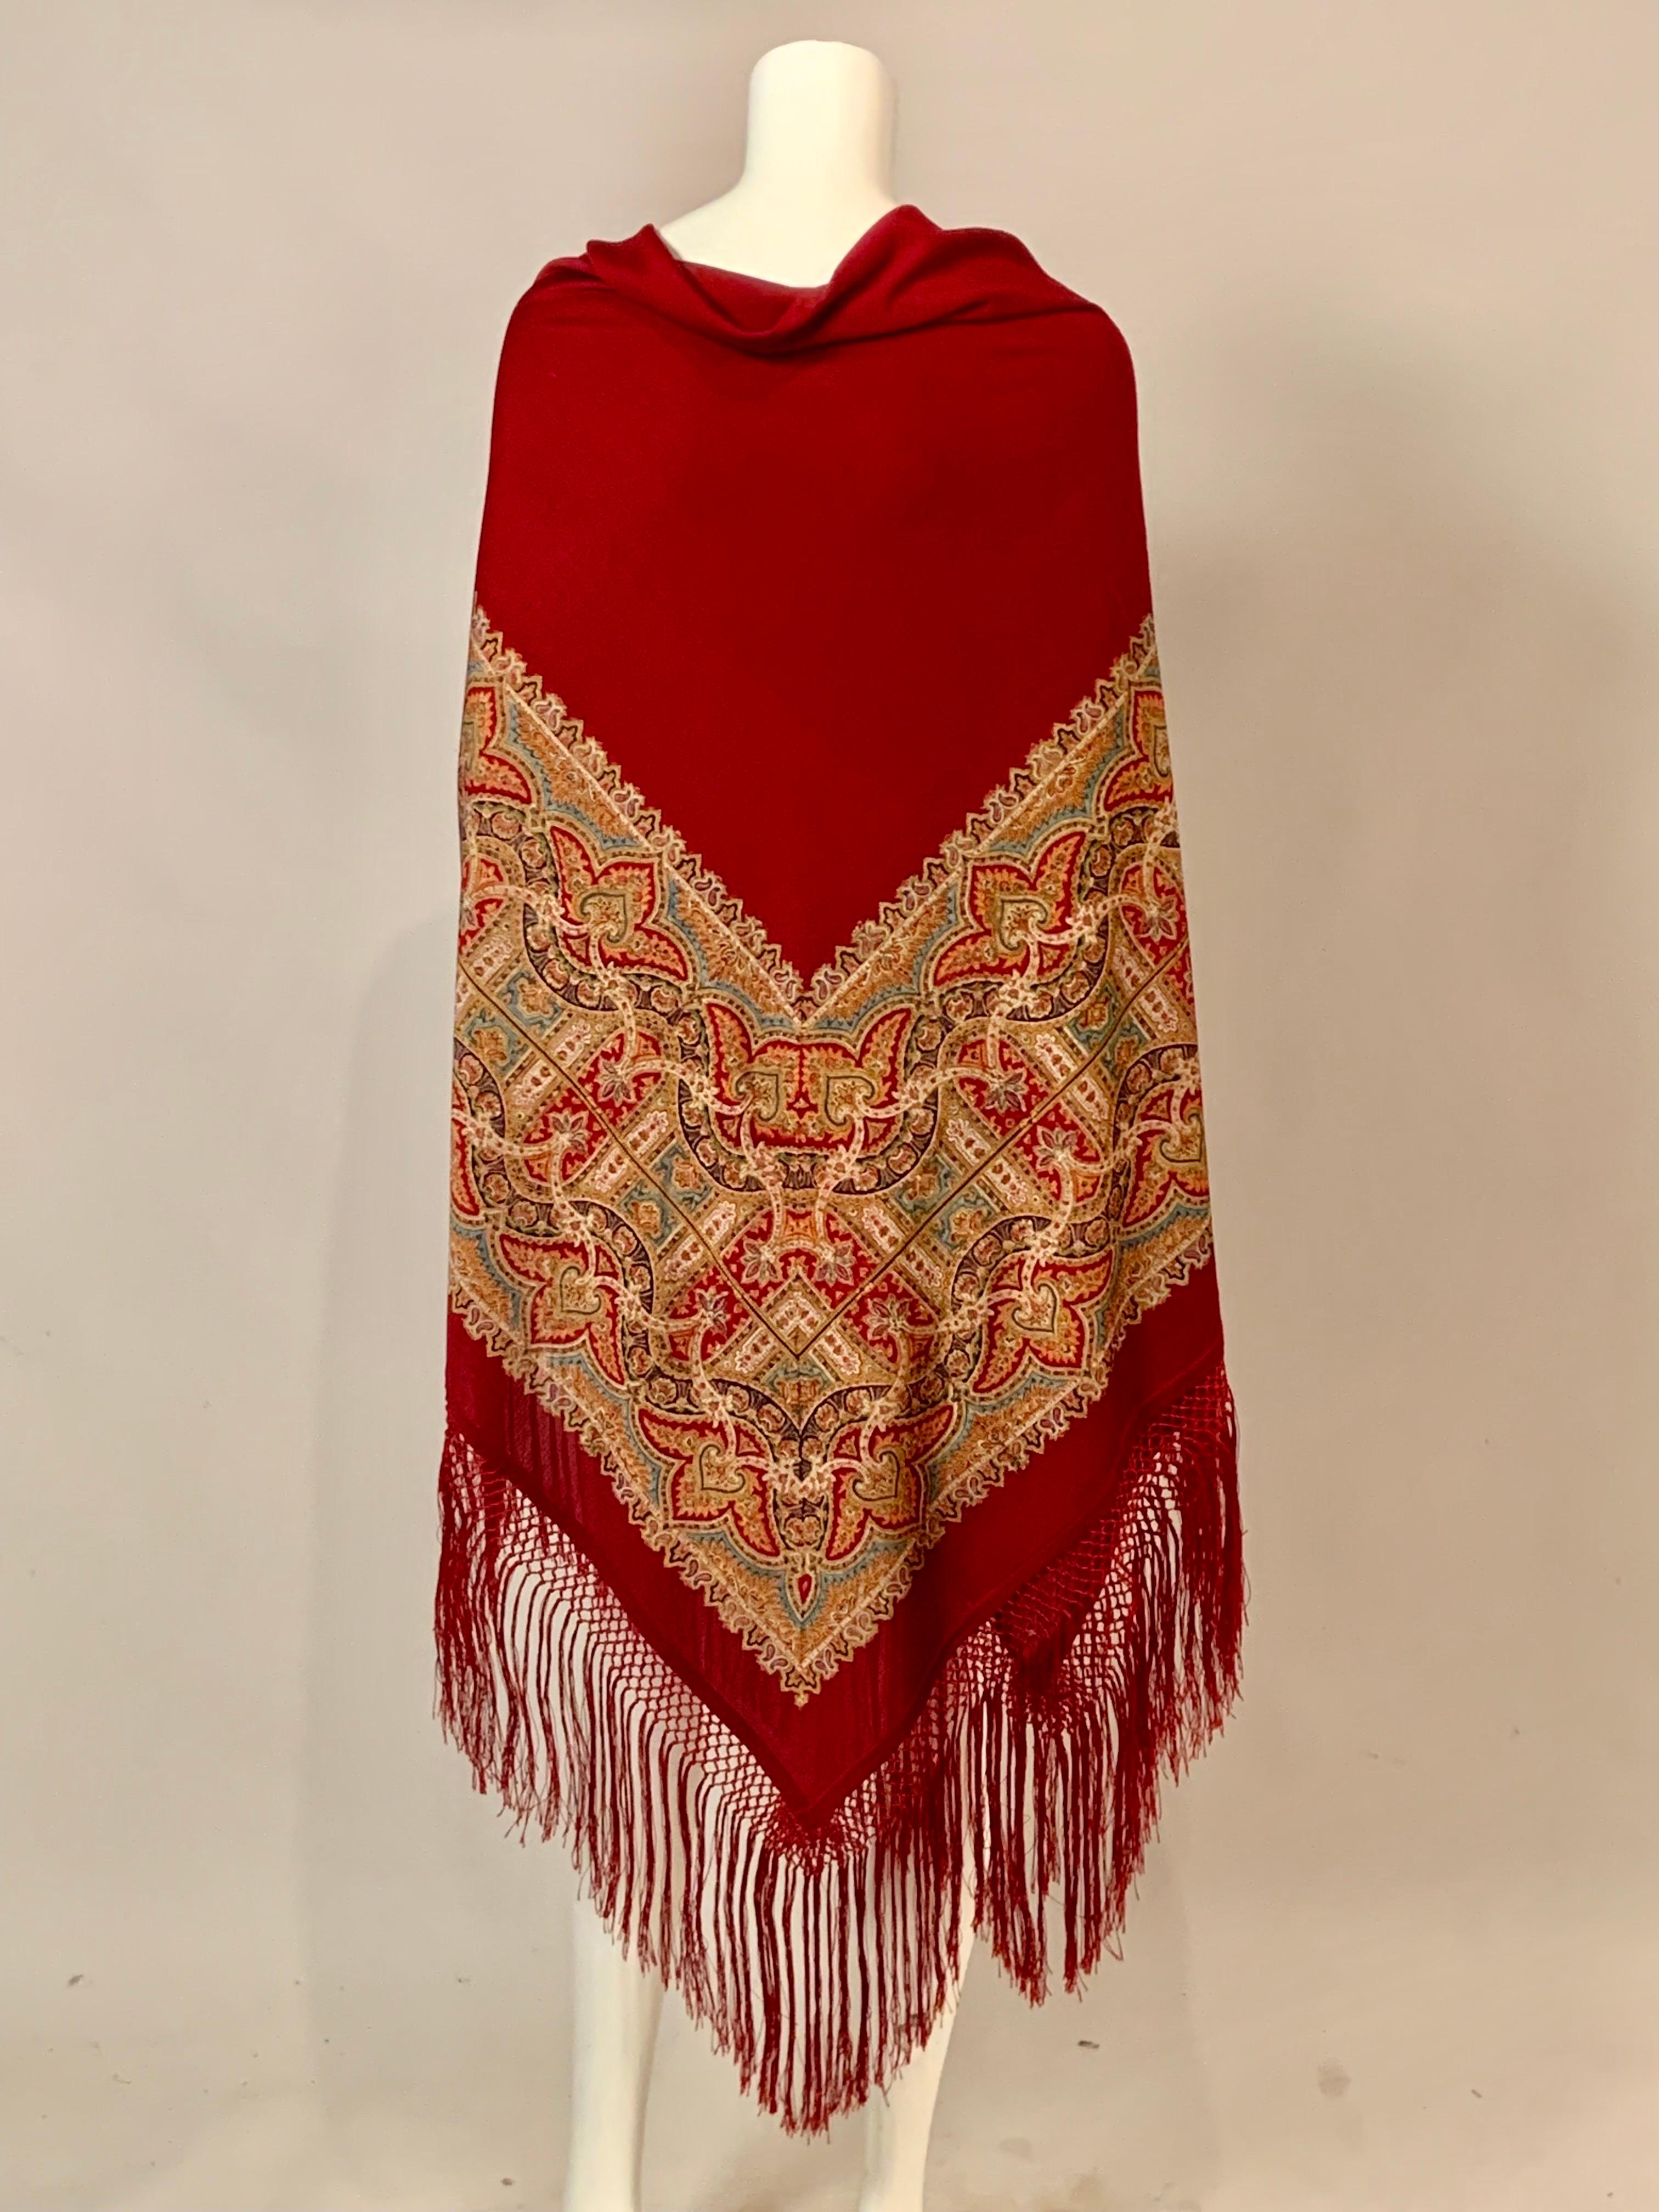 Paisley Printed Burgundy Red Shawl with Silk Fringe For Sale 2